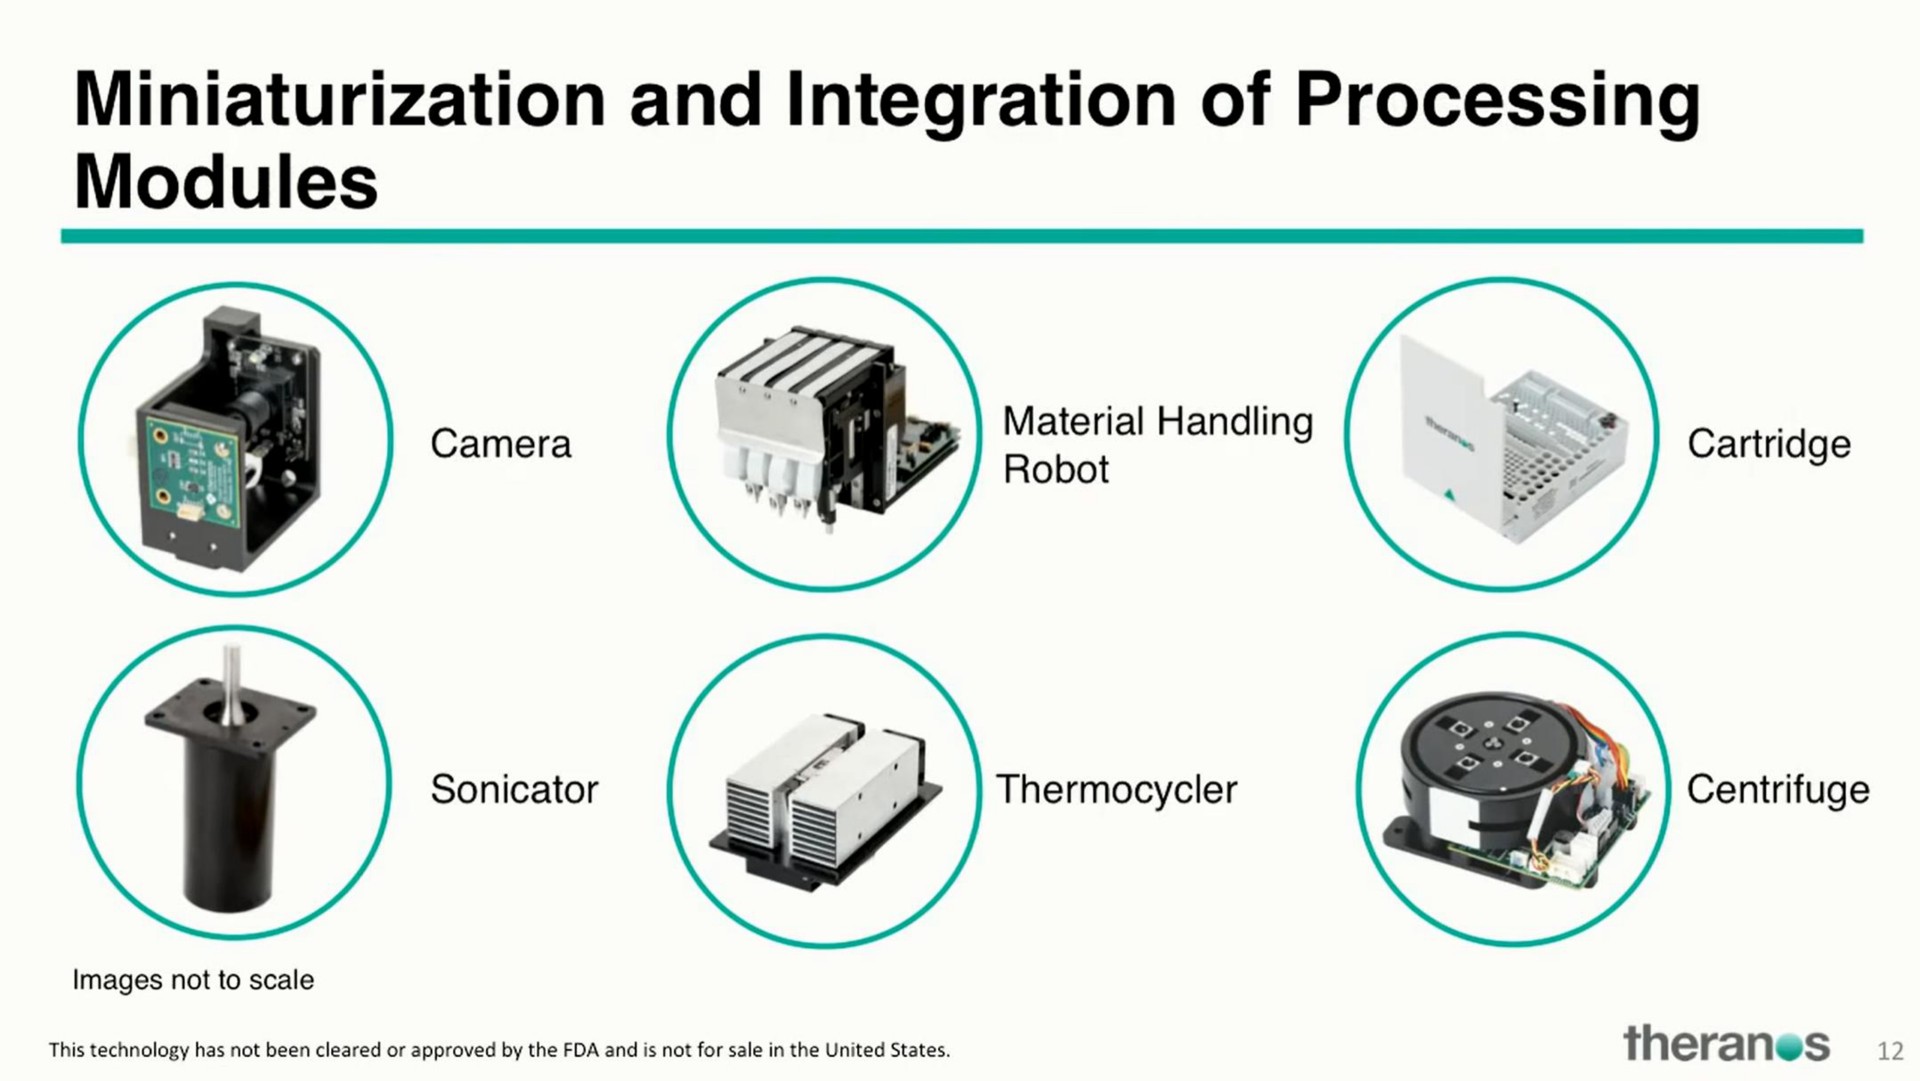 and integration of processing modules | Theranos